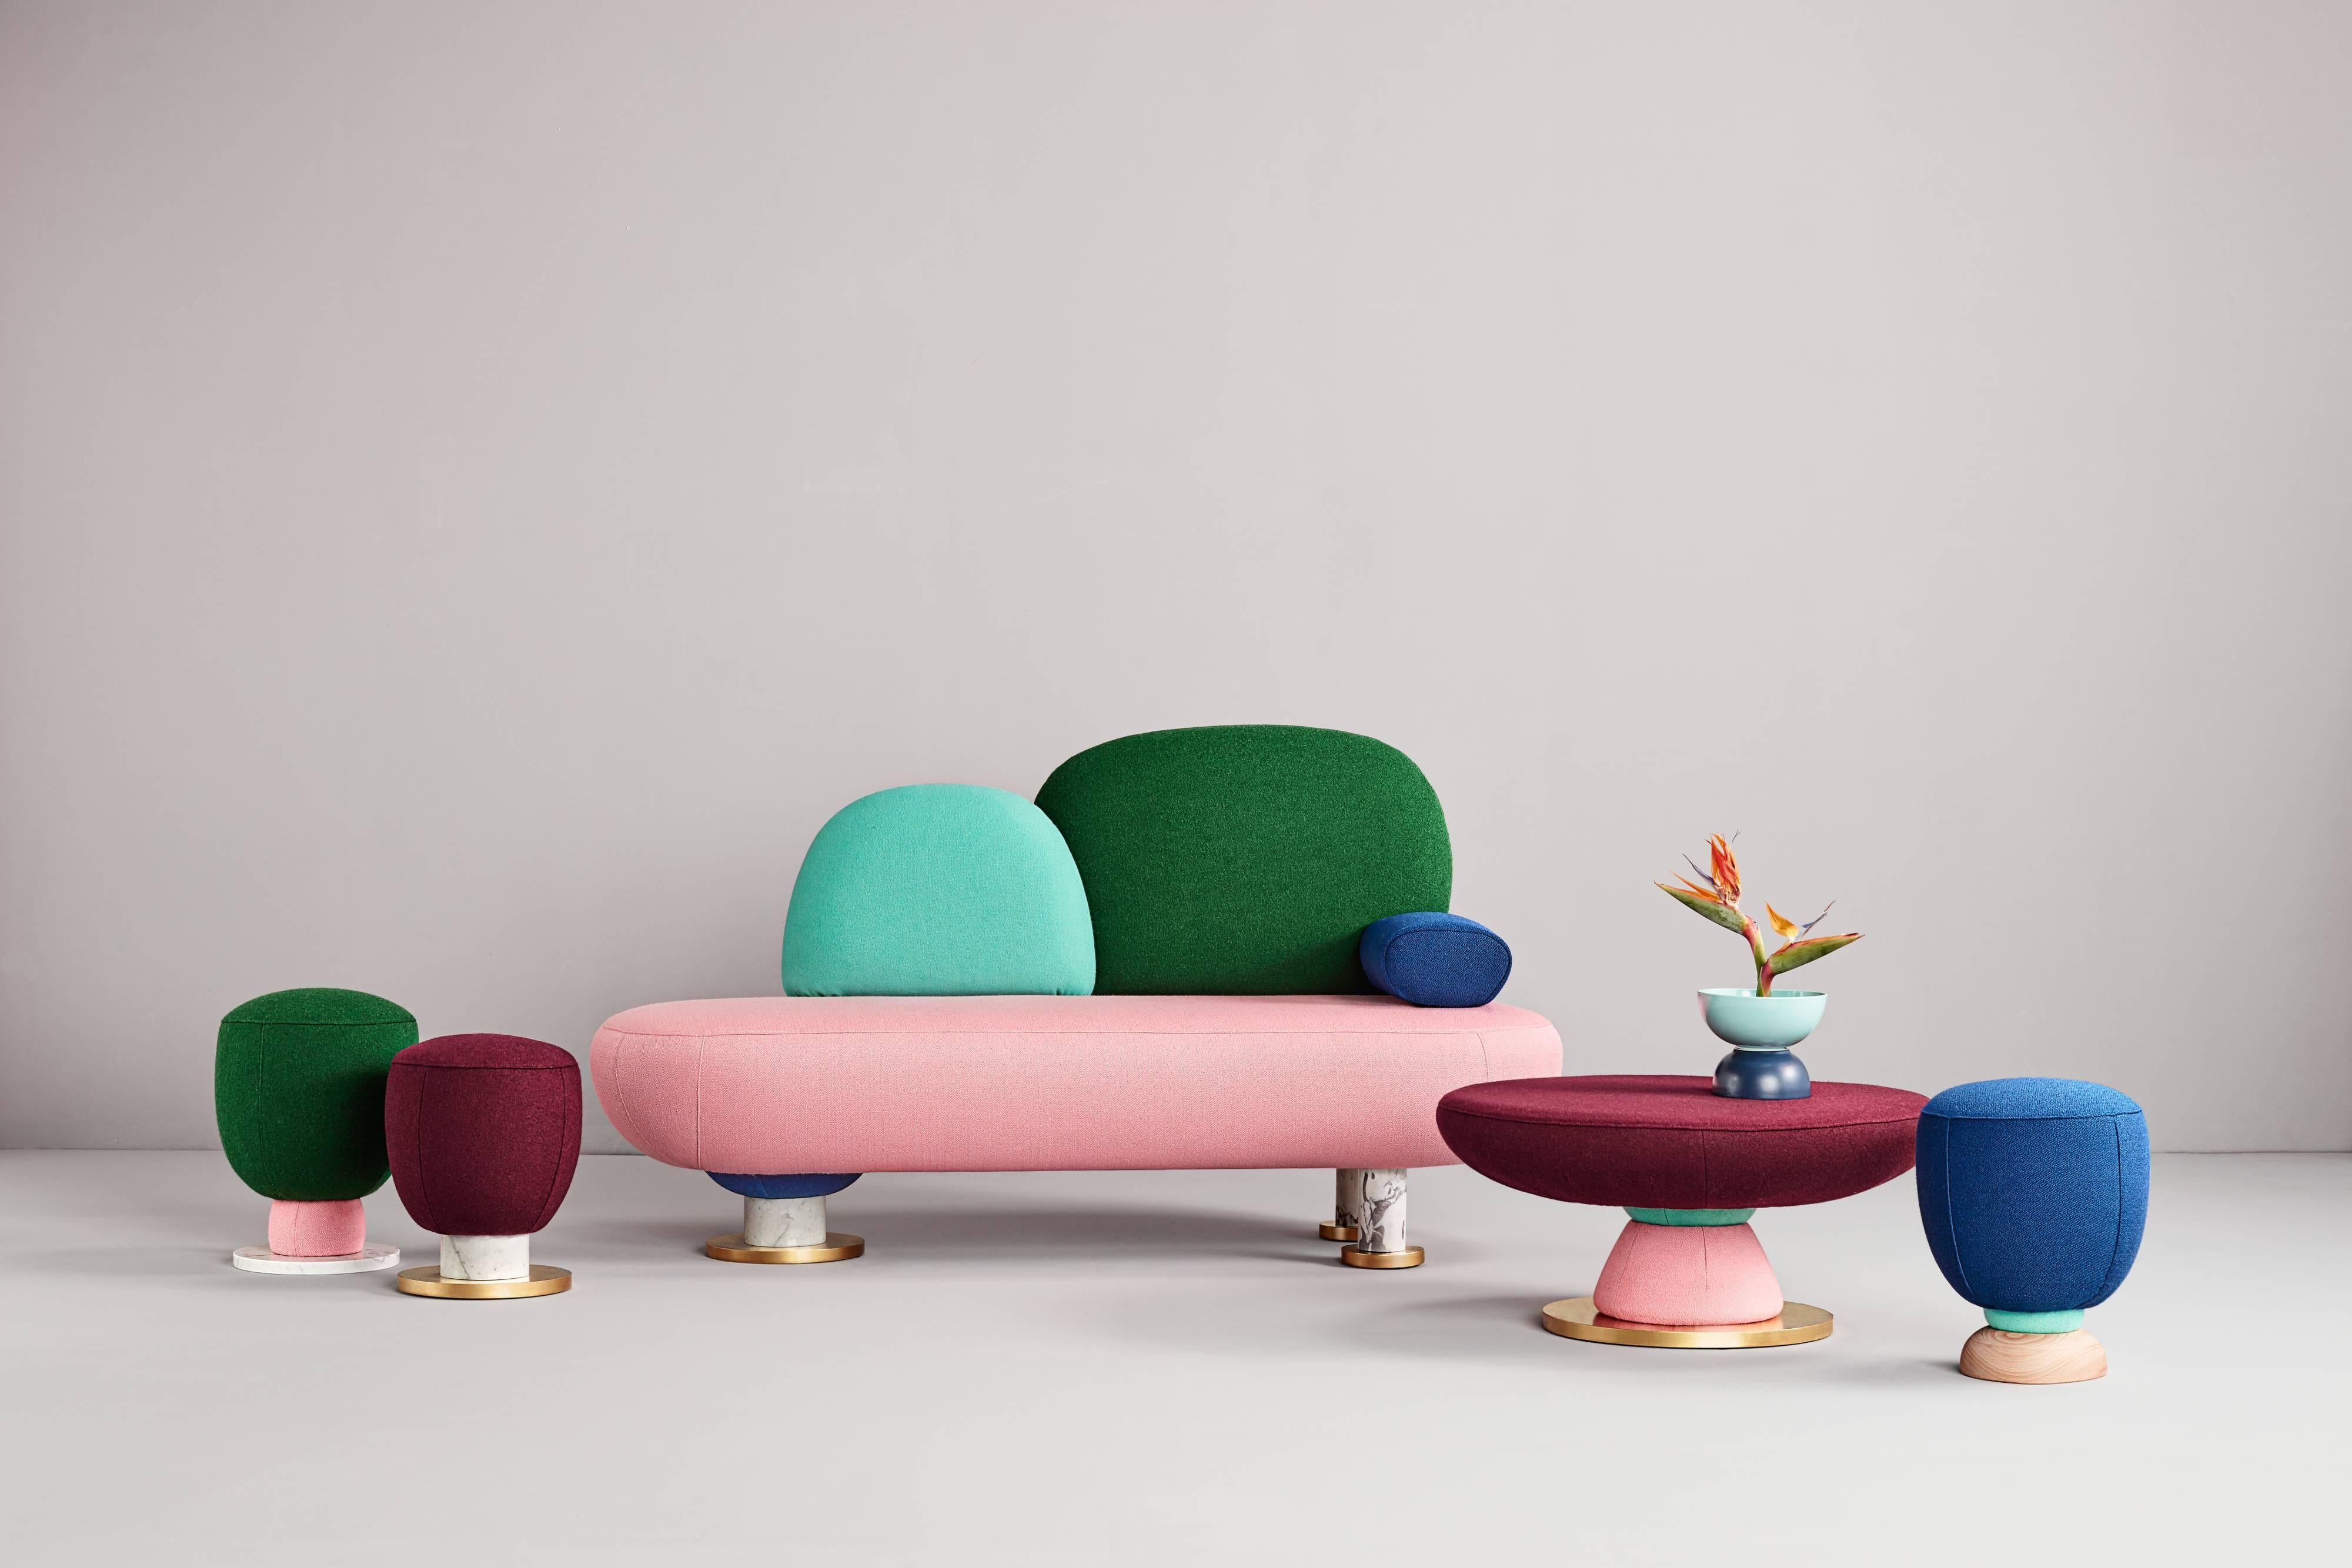 Toadstool Collection Ensemble sofa, table and puffs by Pepe Albargues

Dimensions and materials:

Sofa:
Dimensions: 88 x 160 x 75 cm
Materials: Beech, pine and particles board
wooden frame.
Fiber coated, polyurethane 3542 seat.
Fiberglass